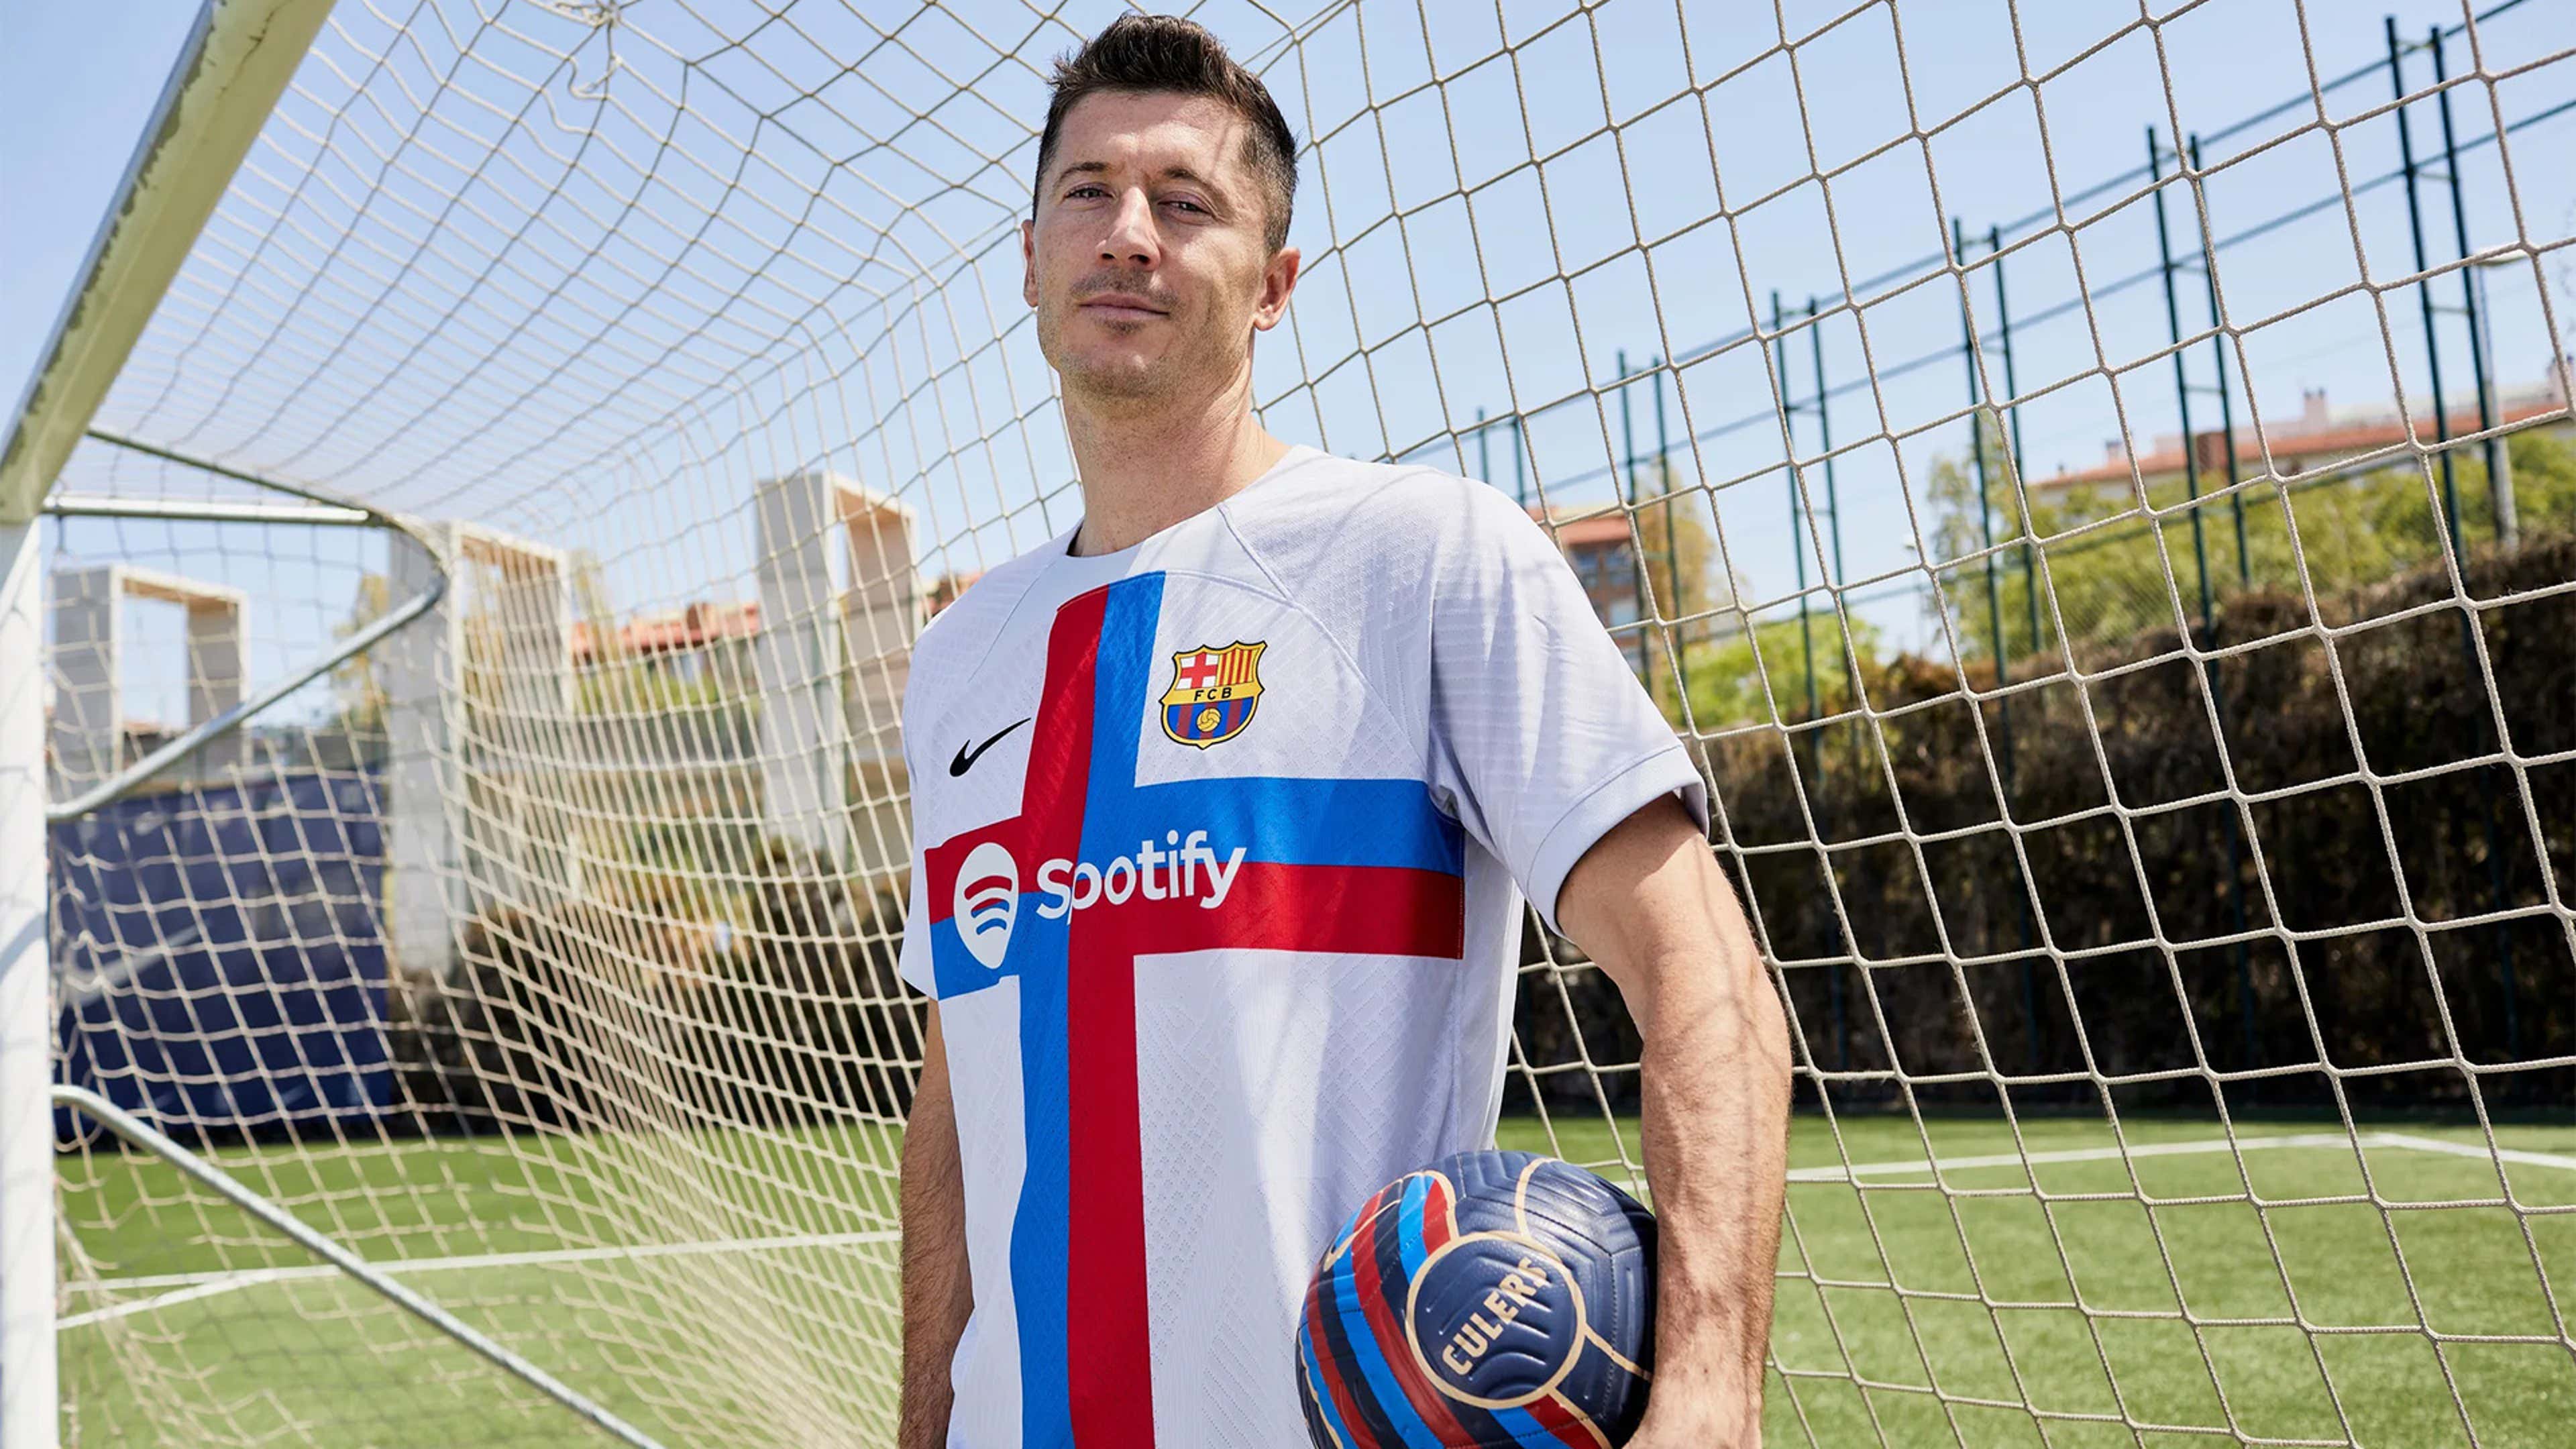 Kostuums Smederij kapsel Barcelona and Nike unveil new 2022-23 third kit inspired by the club's  commitment to inclusion and diversity | Goal.com English Oman